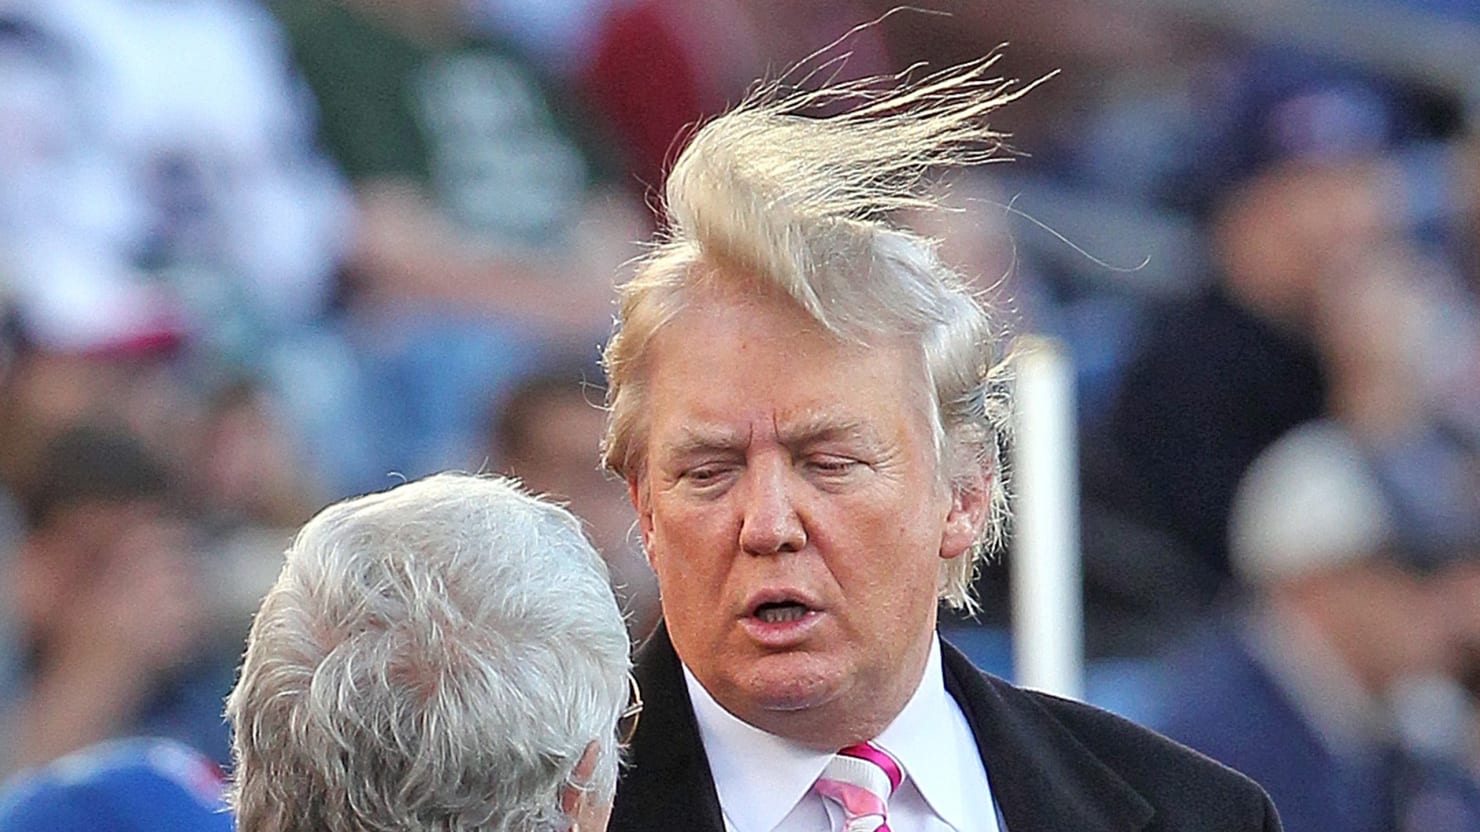 Can Trumps Hair Survive Inauguration Day